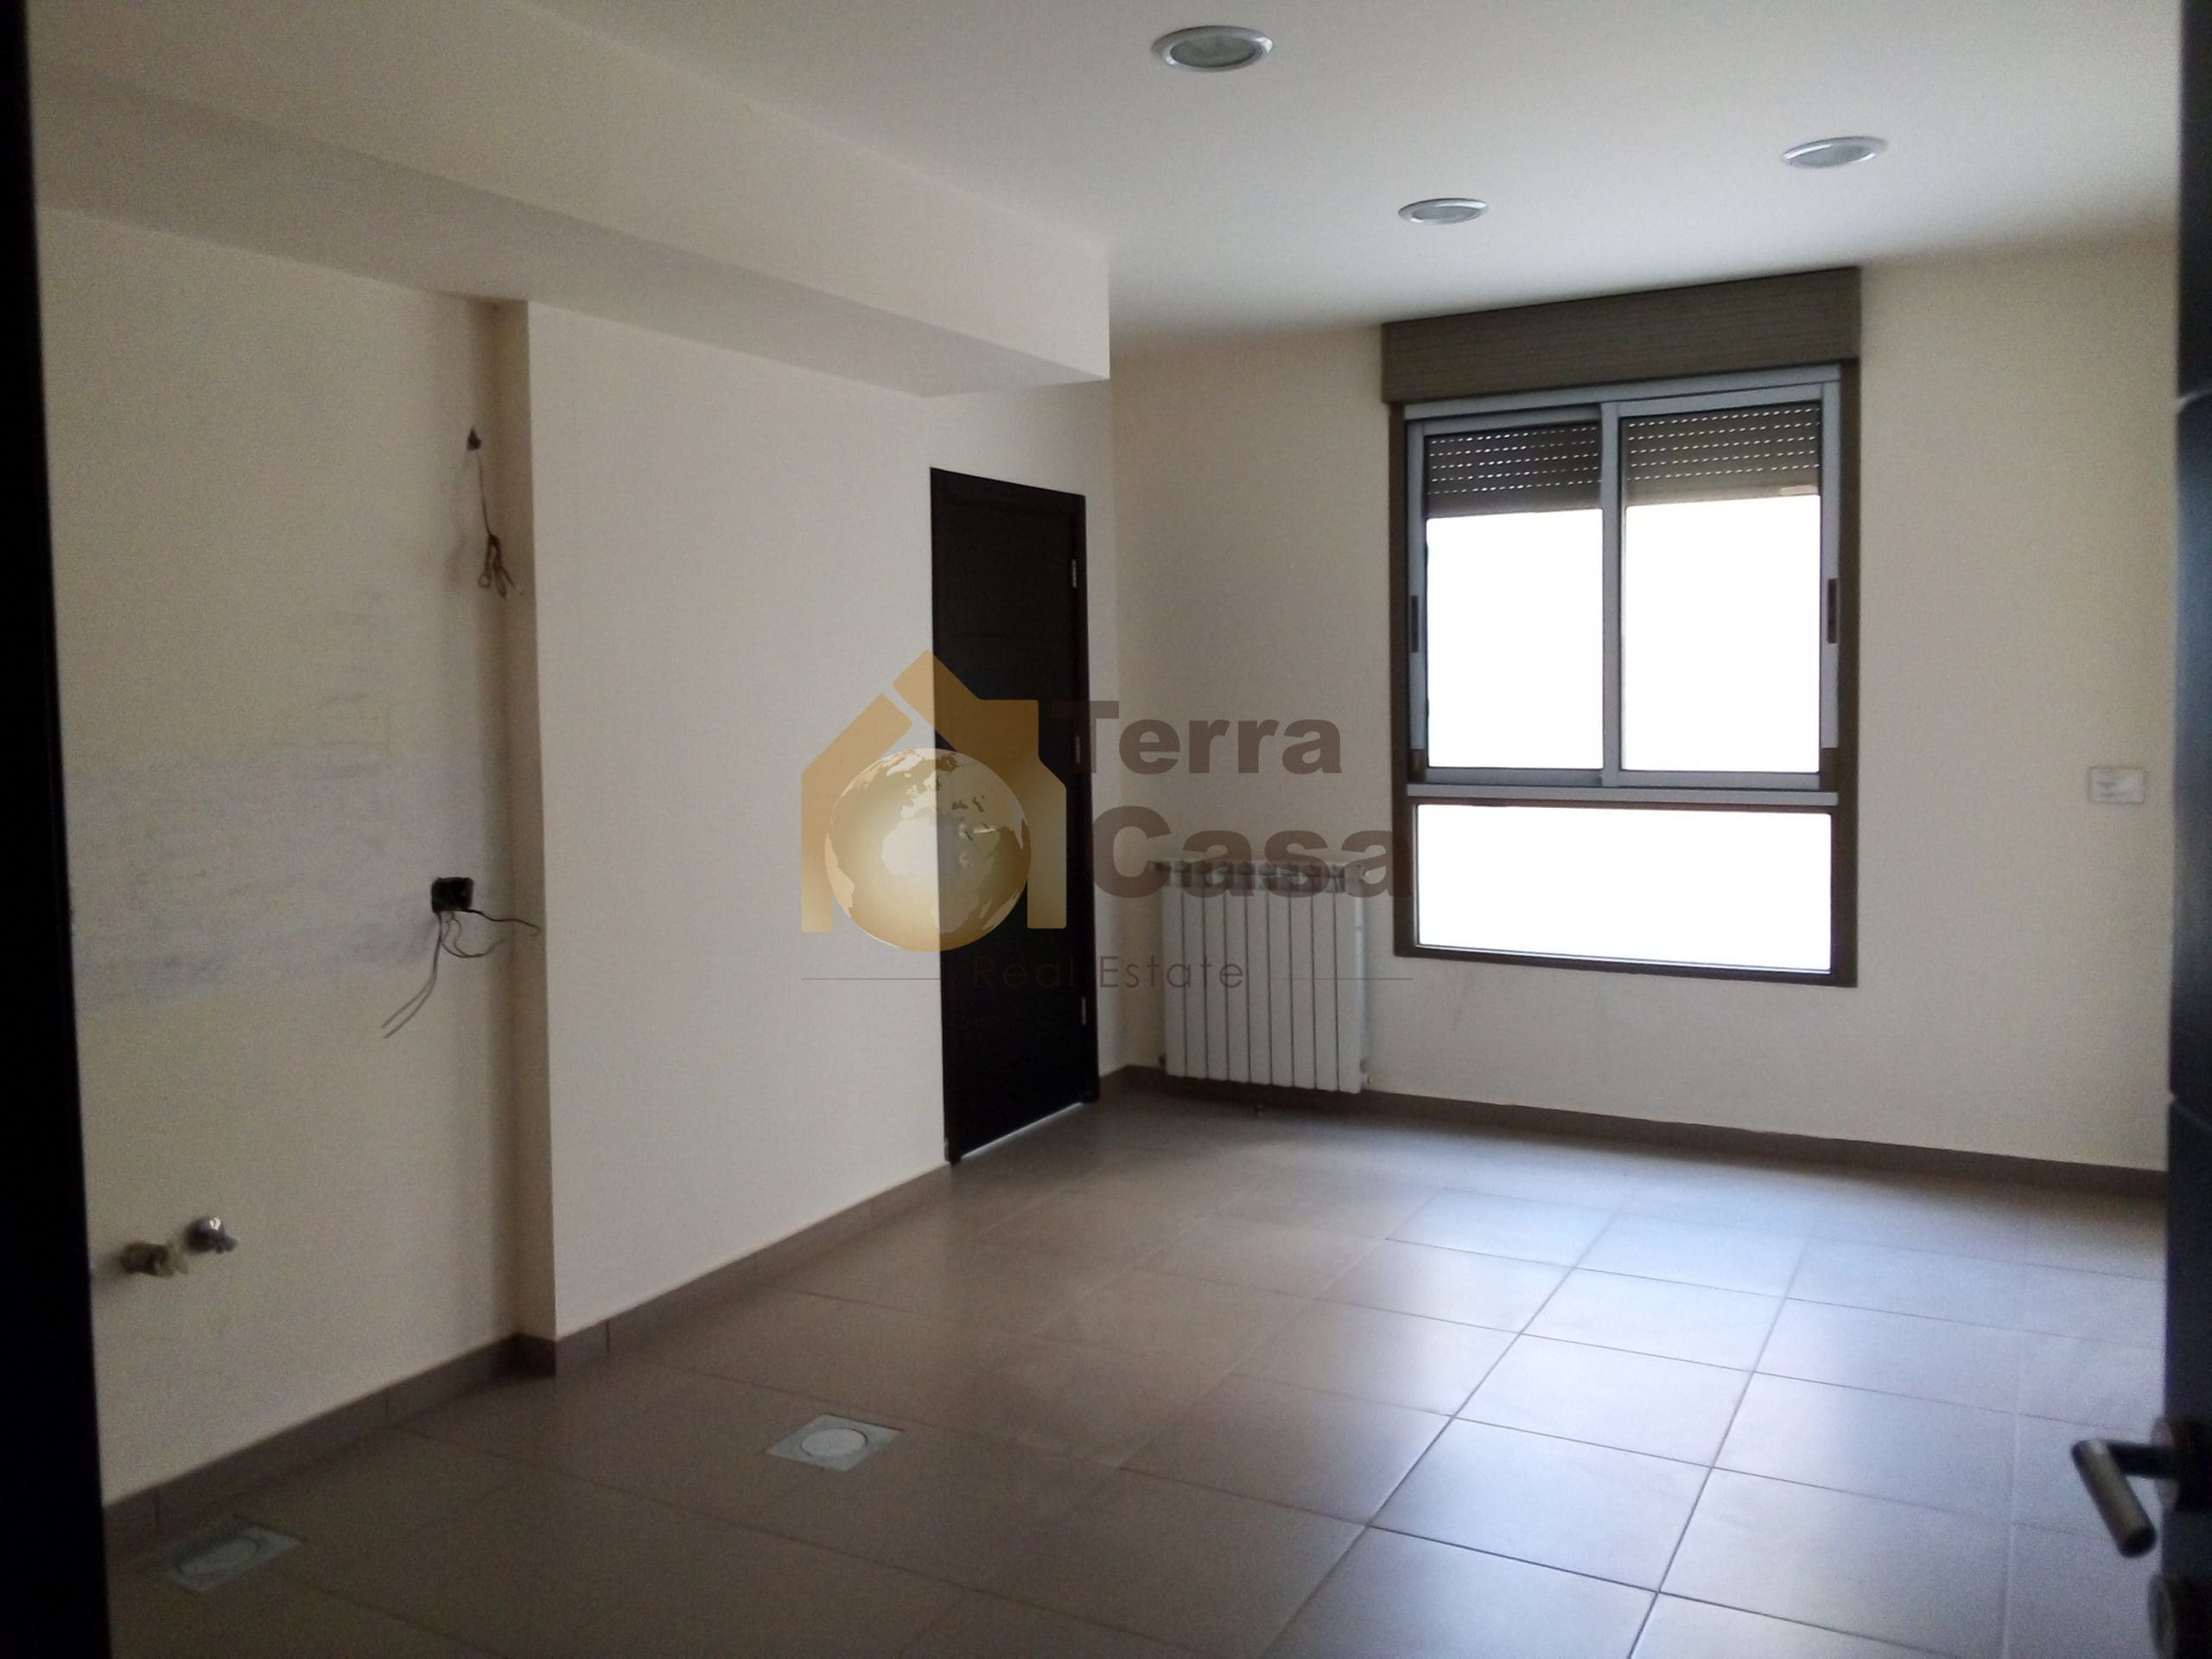 Apartment  brand new with 30 sqm  terrace cash payment.